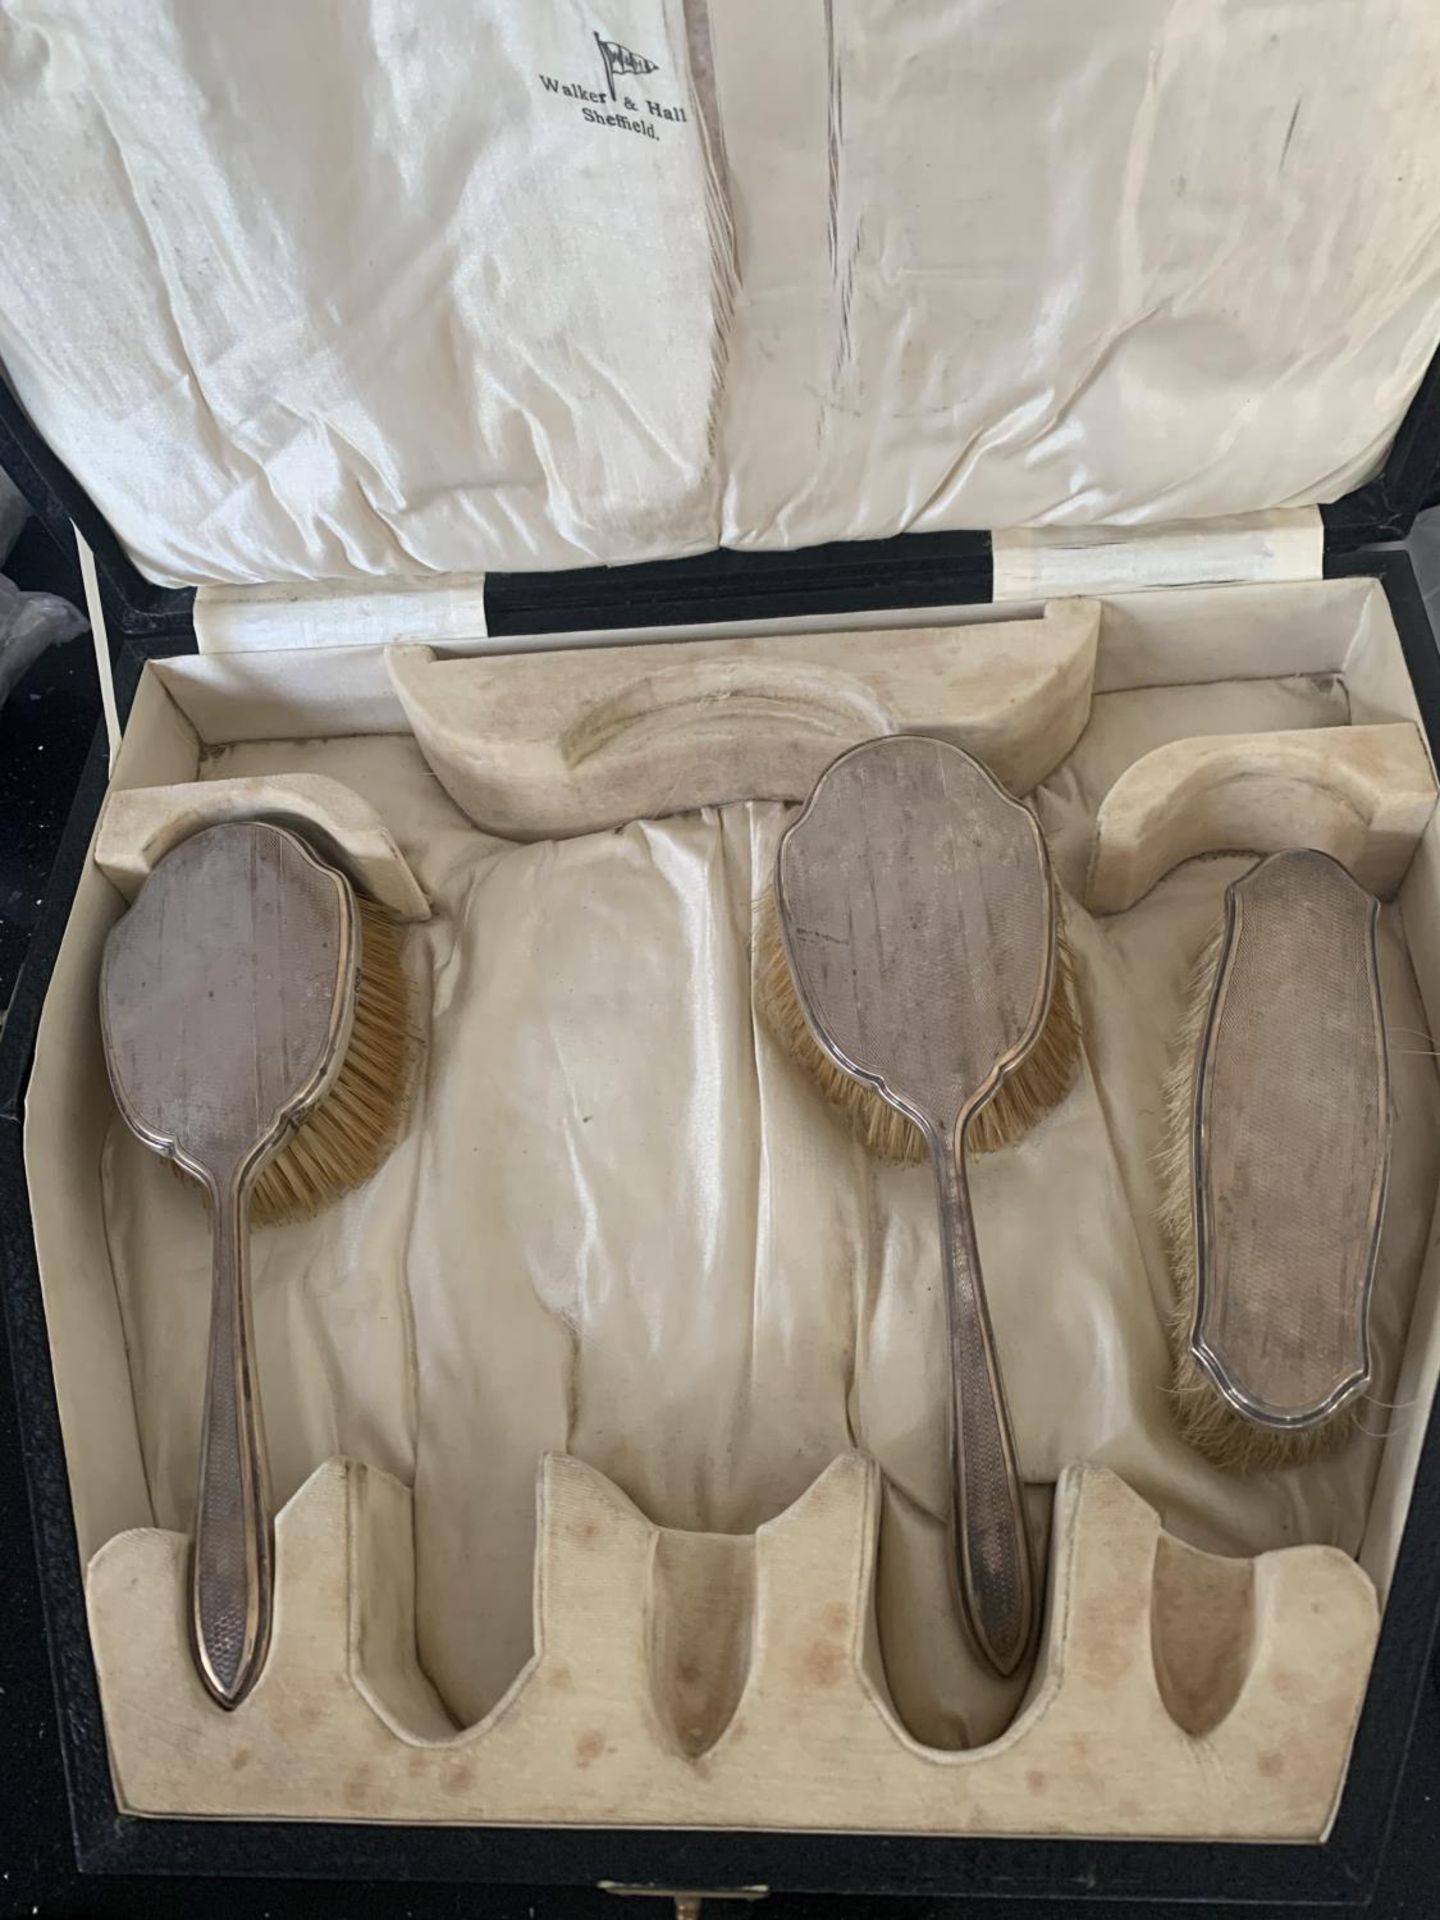 THREE HALLMARKED SHEFFILED SILVER BACKED BRUSHES IN A PRESENTATION BOX